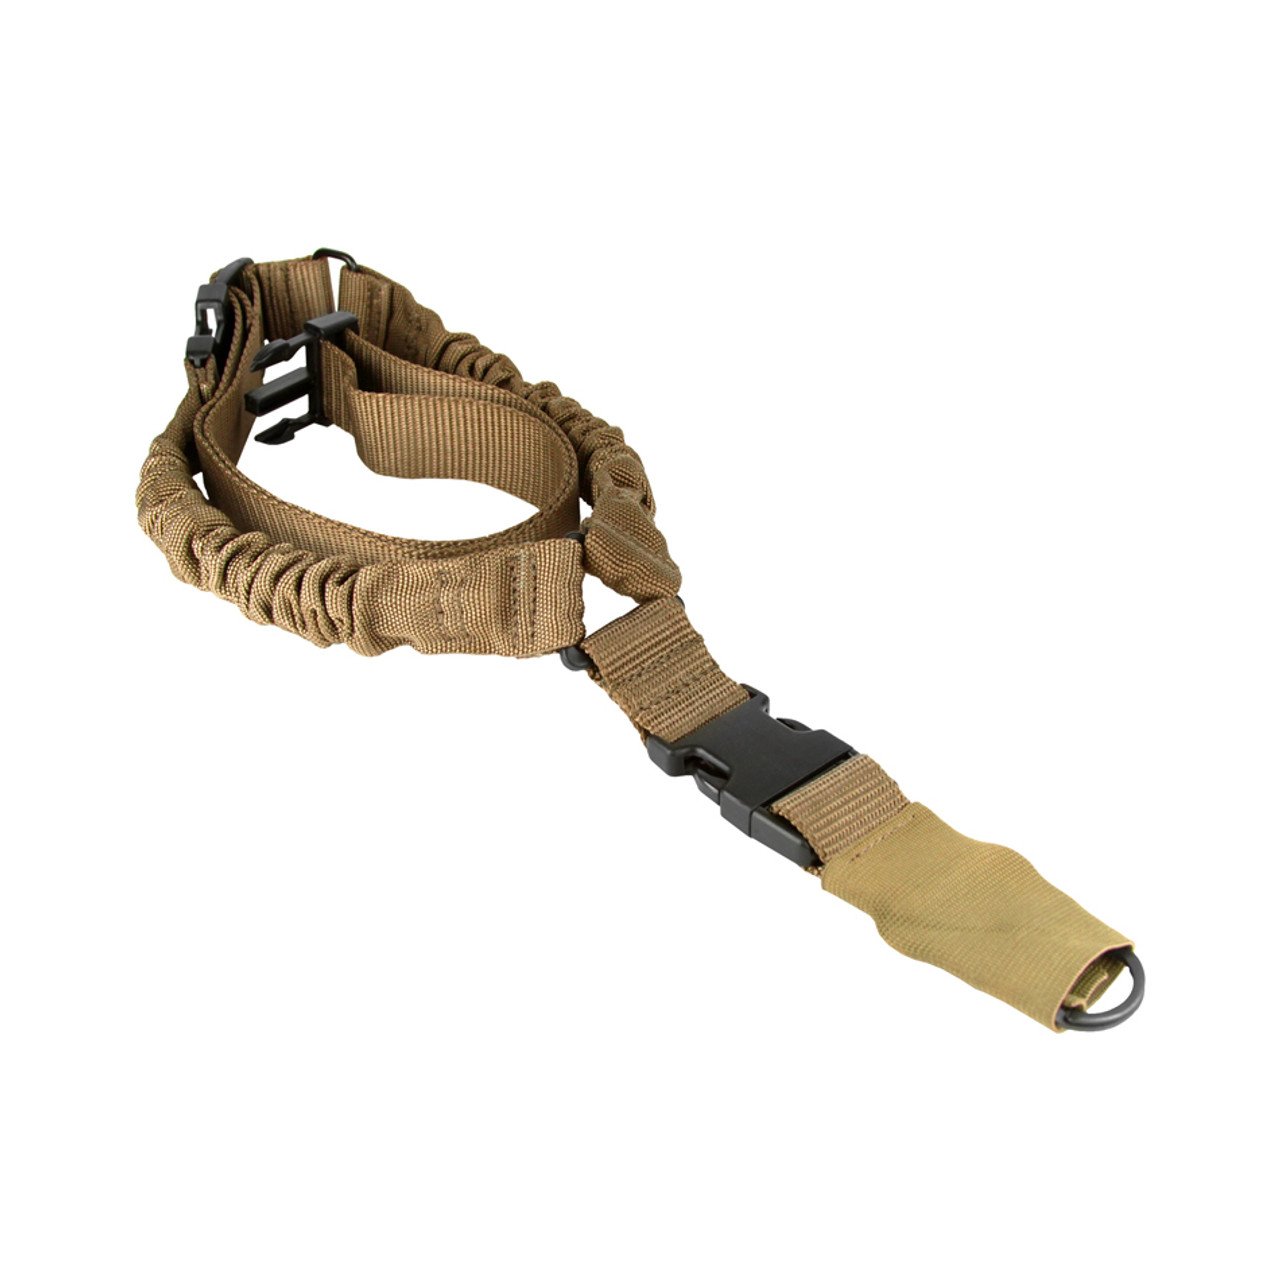 Aim Sports - One Point Bungee Sling - Tan - political-message.com